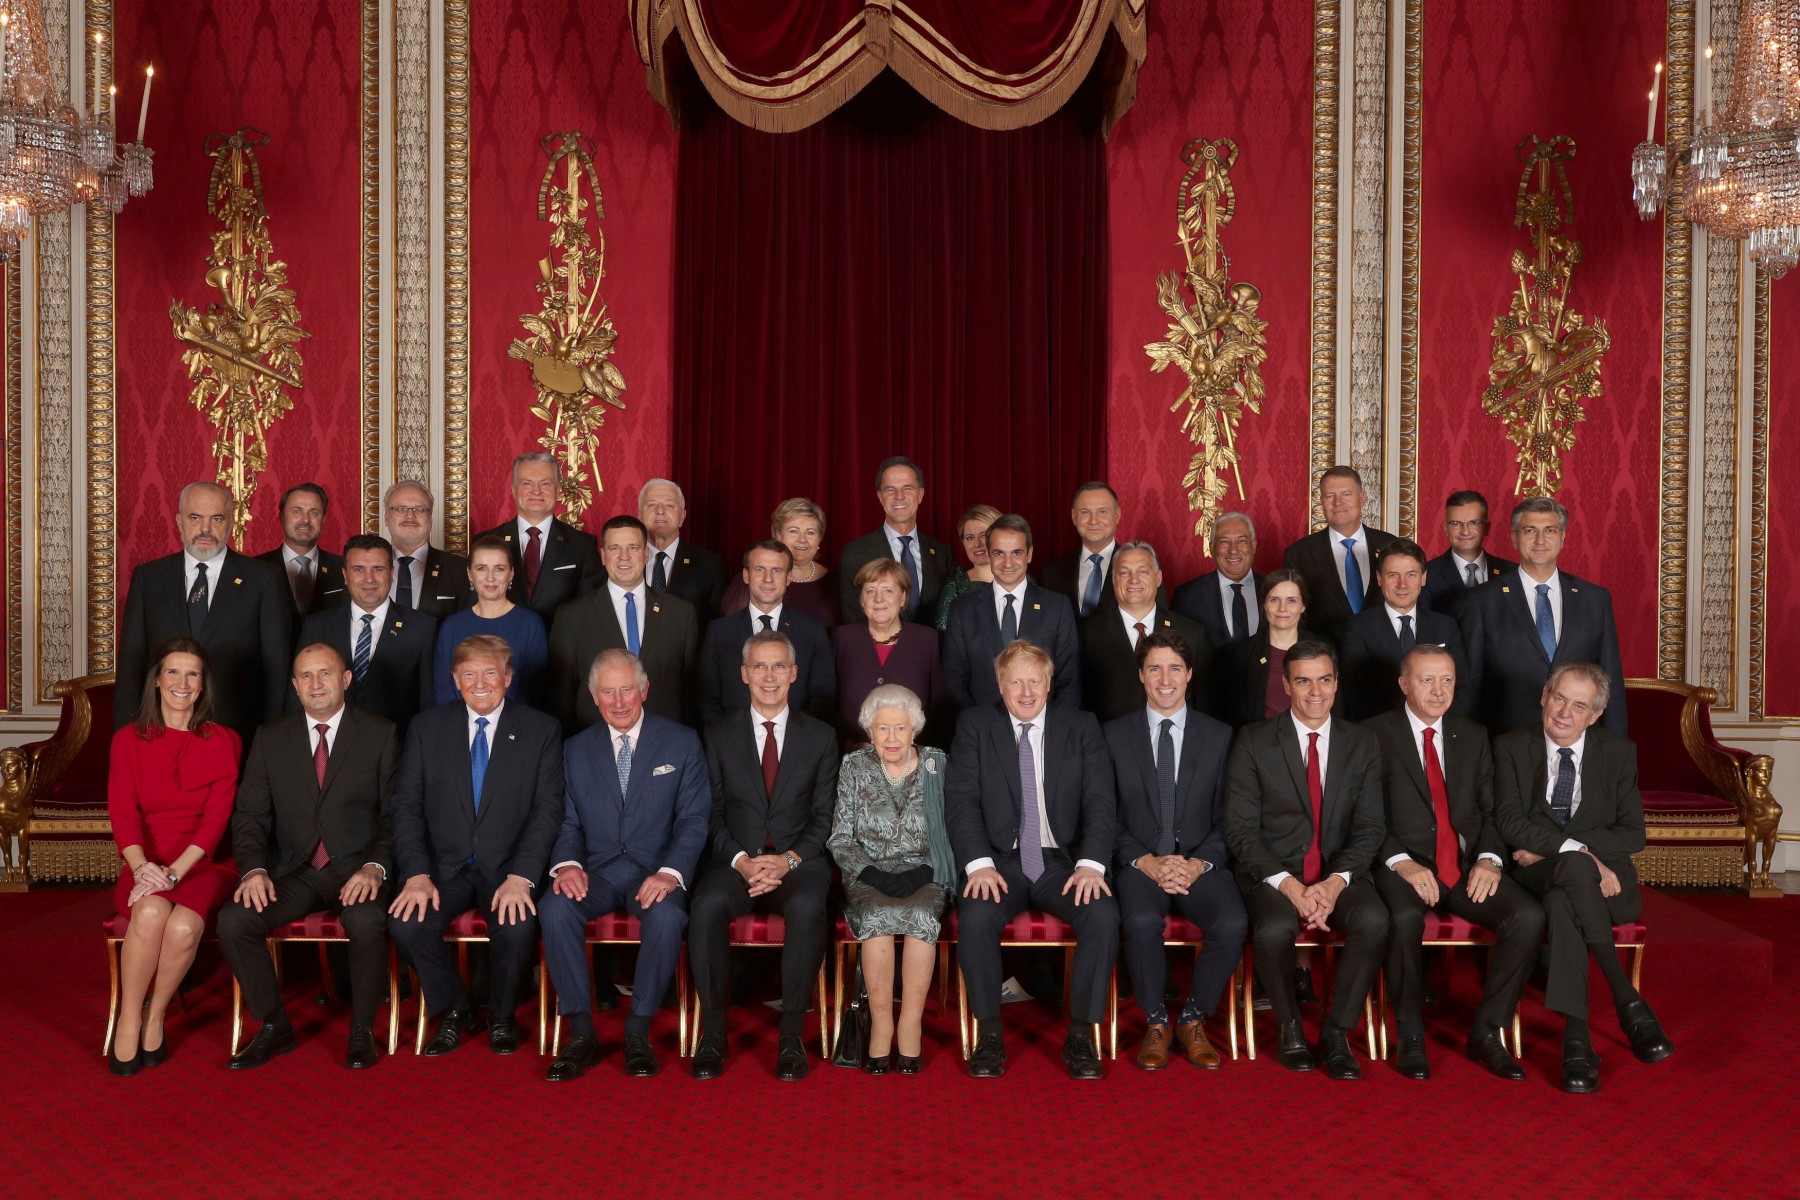 Leaders of NATO alliance countries, and its secretary general, join the Queen and Prince Charles for a group picture during a reception in Buckingham Palace